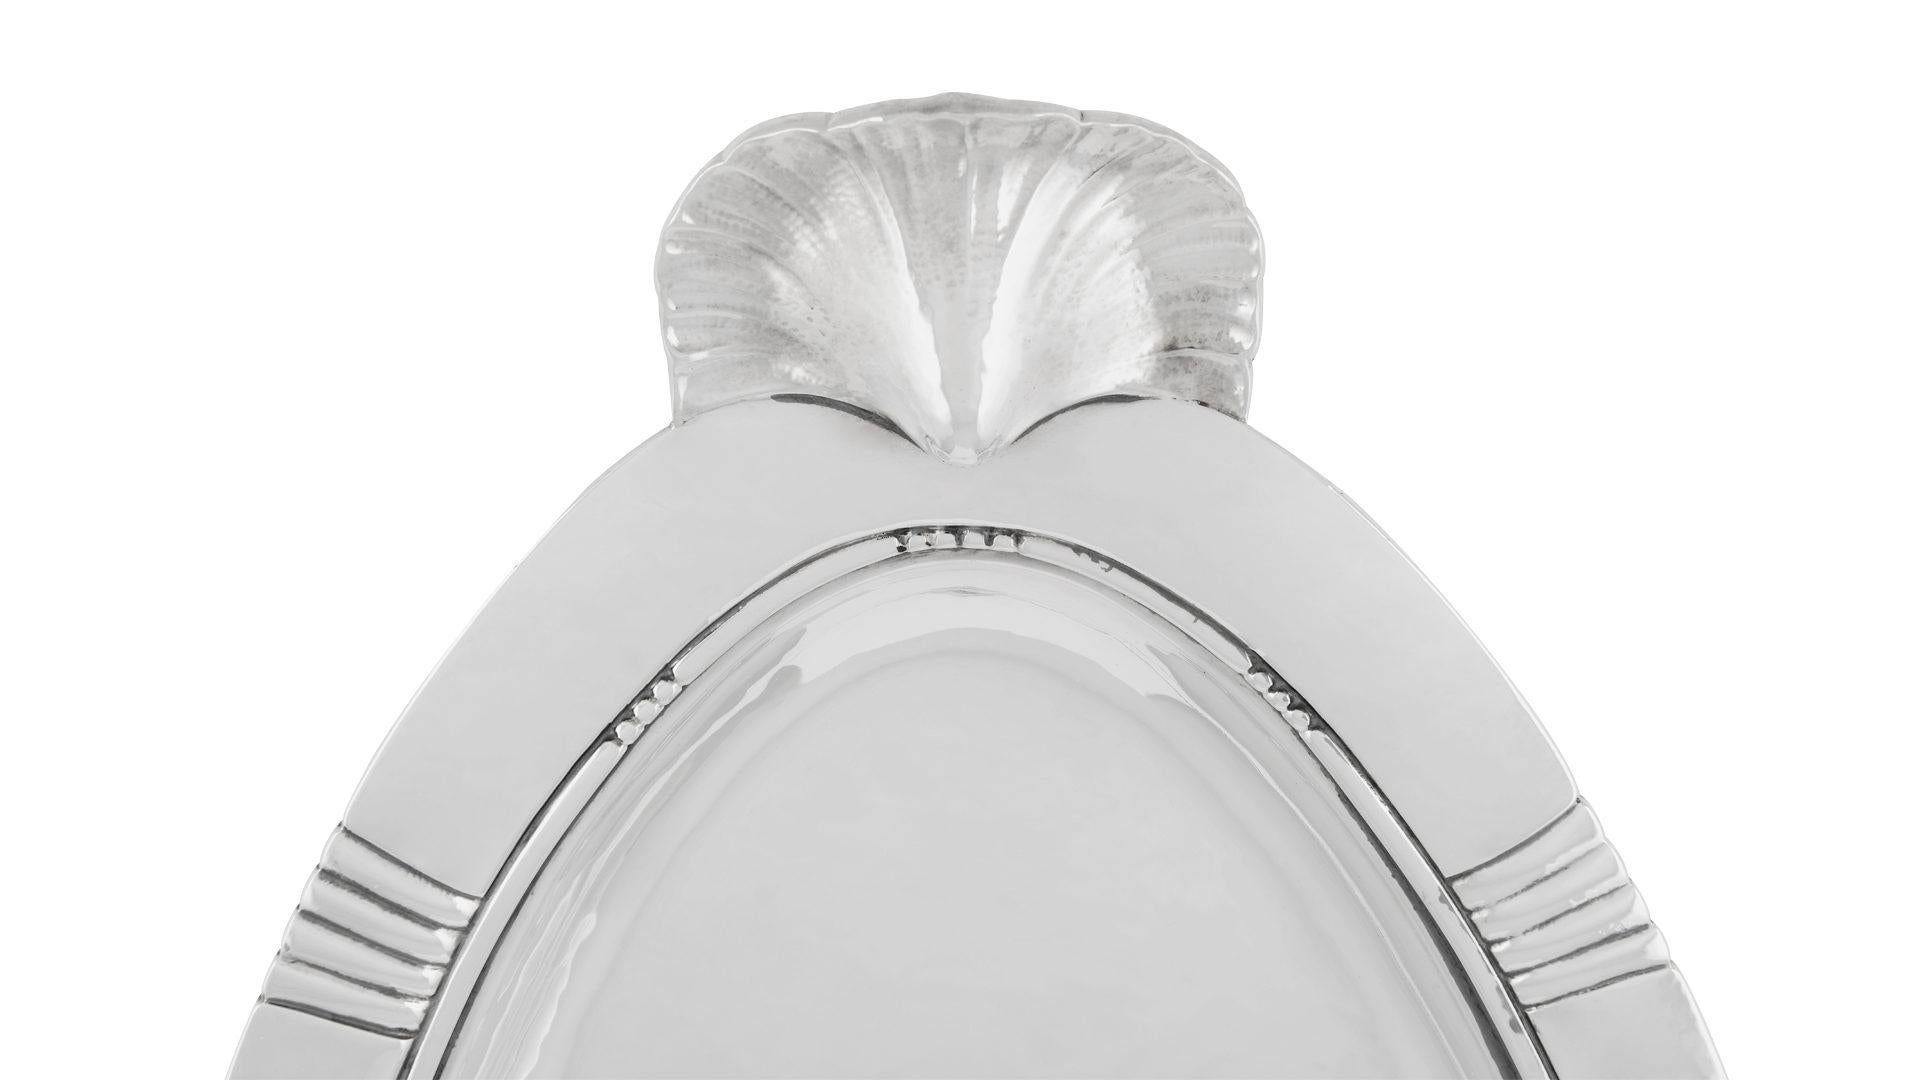 This is a very rarely seen sterling silver Georg Jensen oval fish platter with shell-shaped handles, design #335B by Johan Rohde from circa 1919.

Very long at 29½” x 11 5/8? (74.5cm x 29.5cm). Weighs 67.35oz (1.91kg).

Vintage Georg Jensen